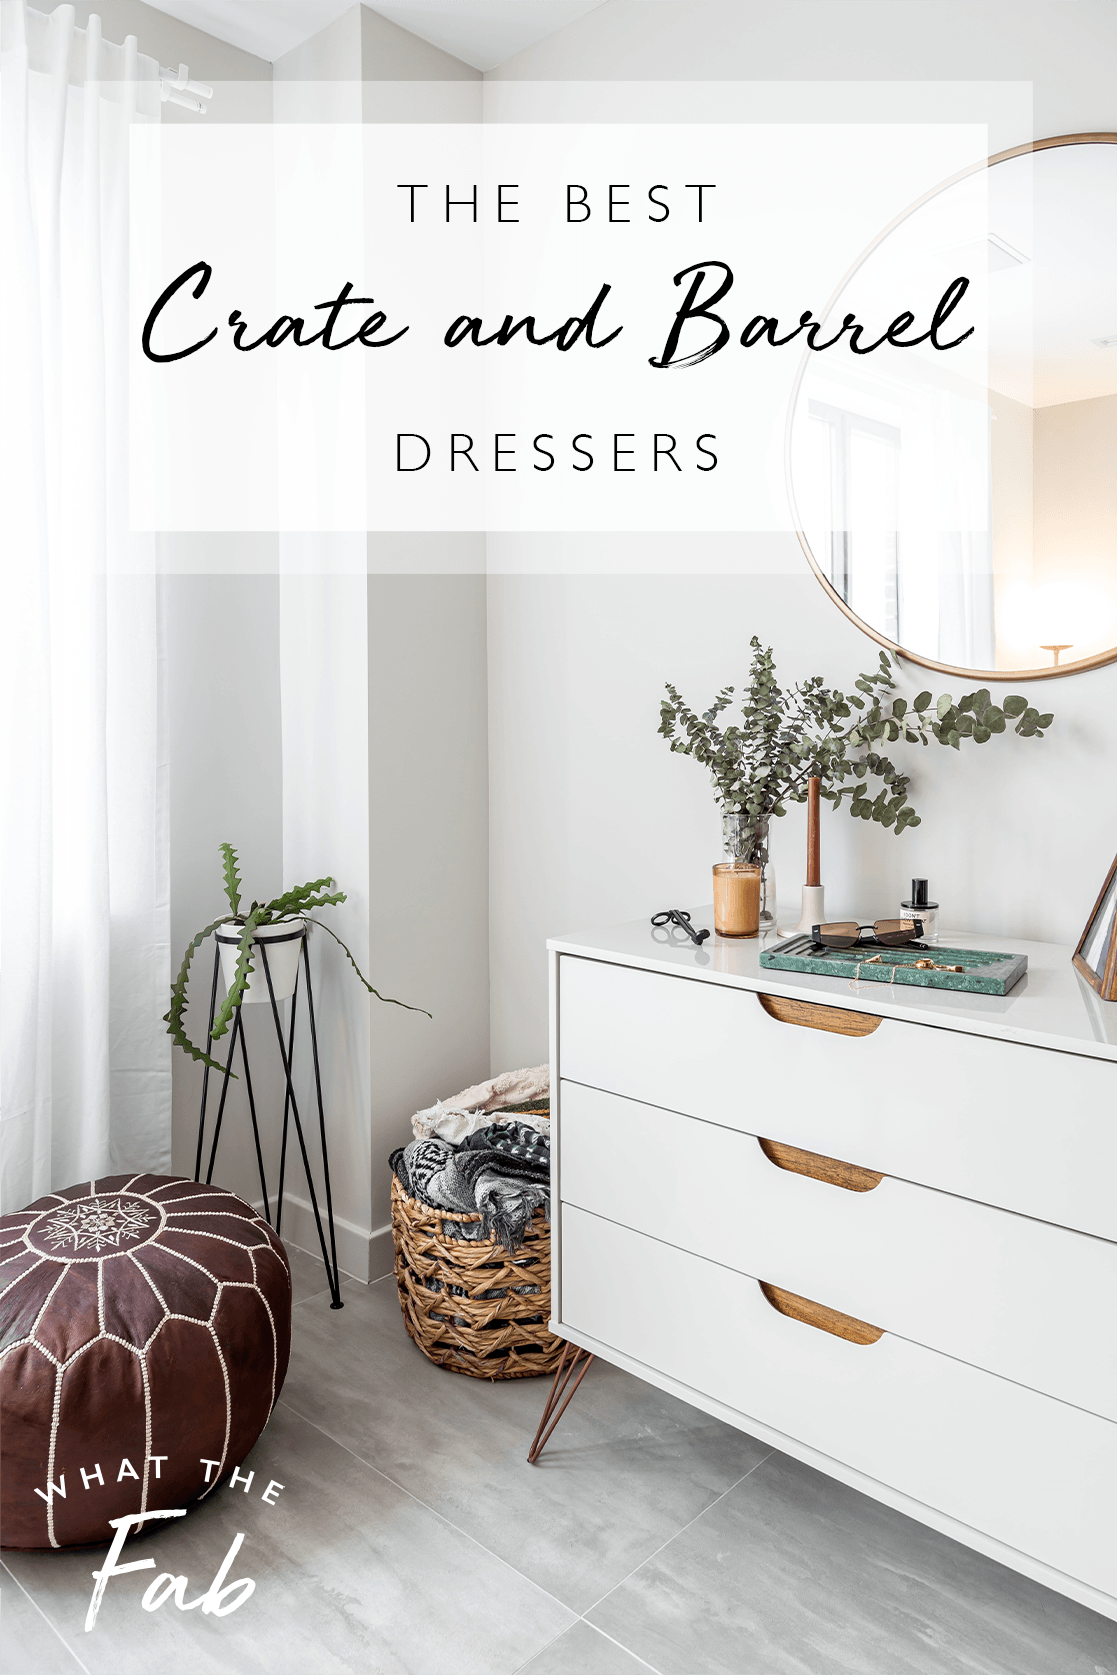 Crate and Barrel Dressers, by Blogger What The Fab